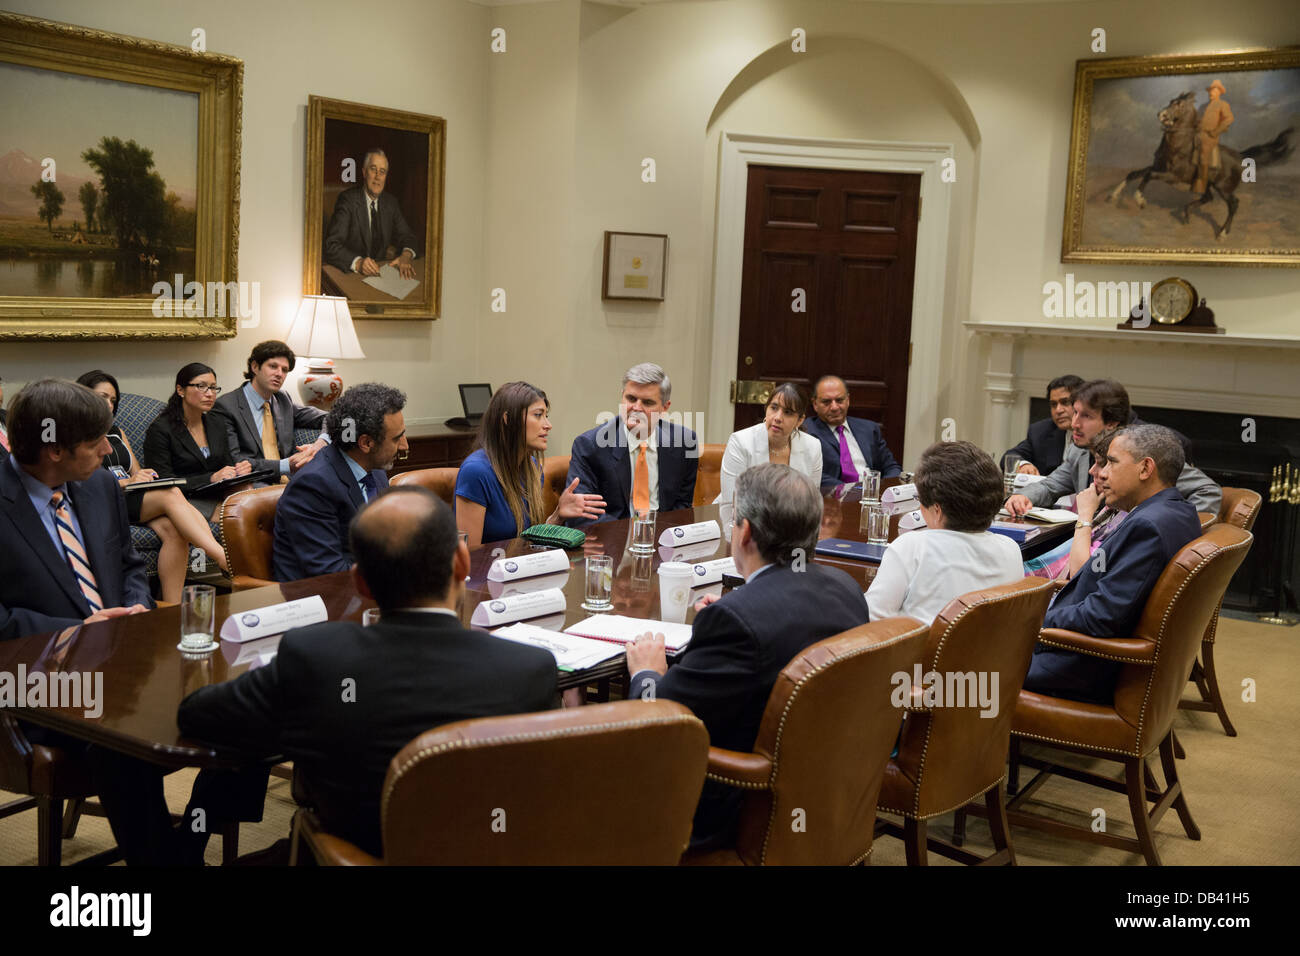 President Barack Obama holds an immigration reform roundtable with business owners and entrepreneurs in the Roosevelt Room of the White House, June 24, 2013. Stock Photo